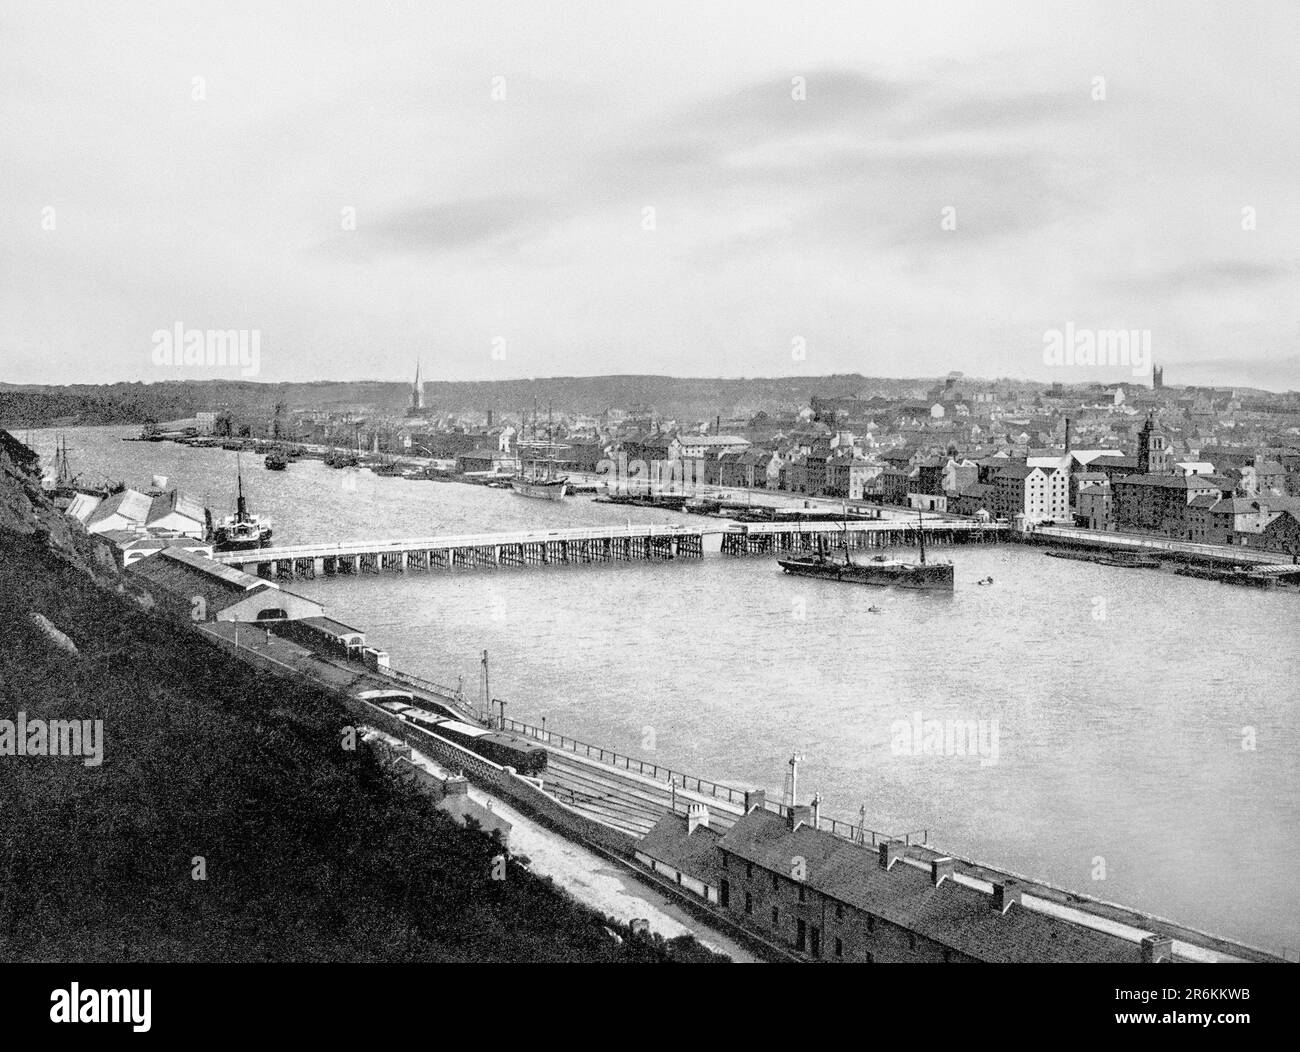 A late 19th century view of the River Suir flowing under the timber and iron bridge later replaced by the Rice Bridge in the early 1980s. Waterford City in the south-east of Ireland is the oldest city in the Republic of Ireland. Waterford Port was a major port  for over a millennium and during the 19th century,the location for the Neptune Shipyard, when the Malcomson family, built and operated the largest fleet of iron steamers in the world between the mid-1850s and the late 1860s. Stock Photo